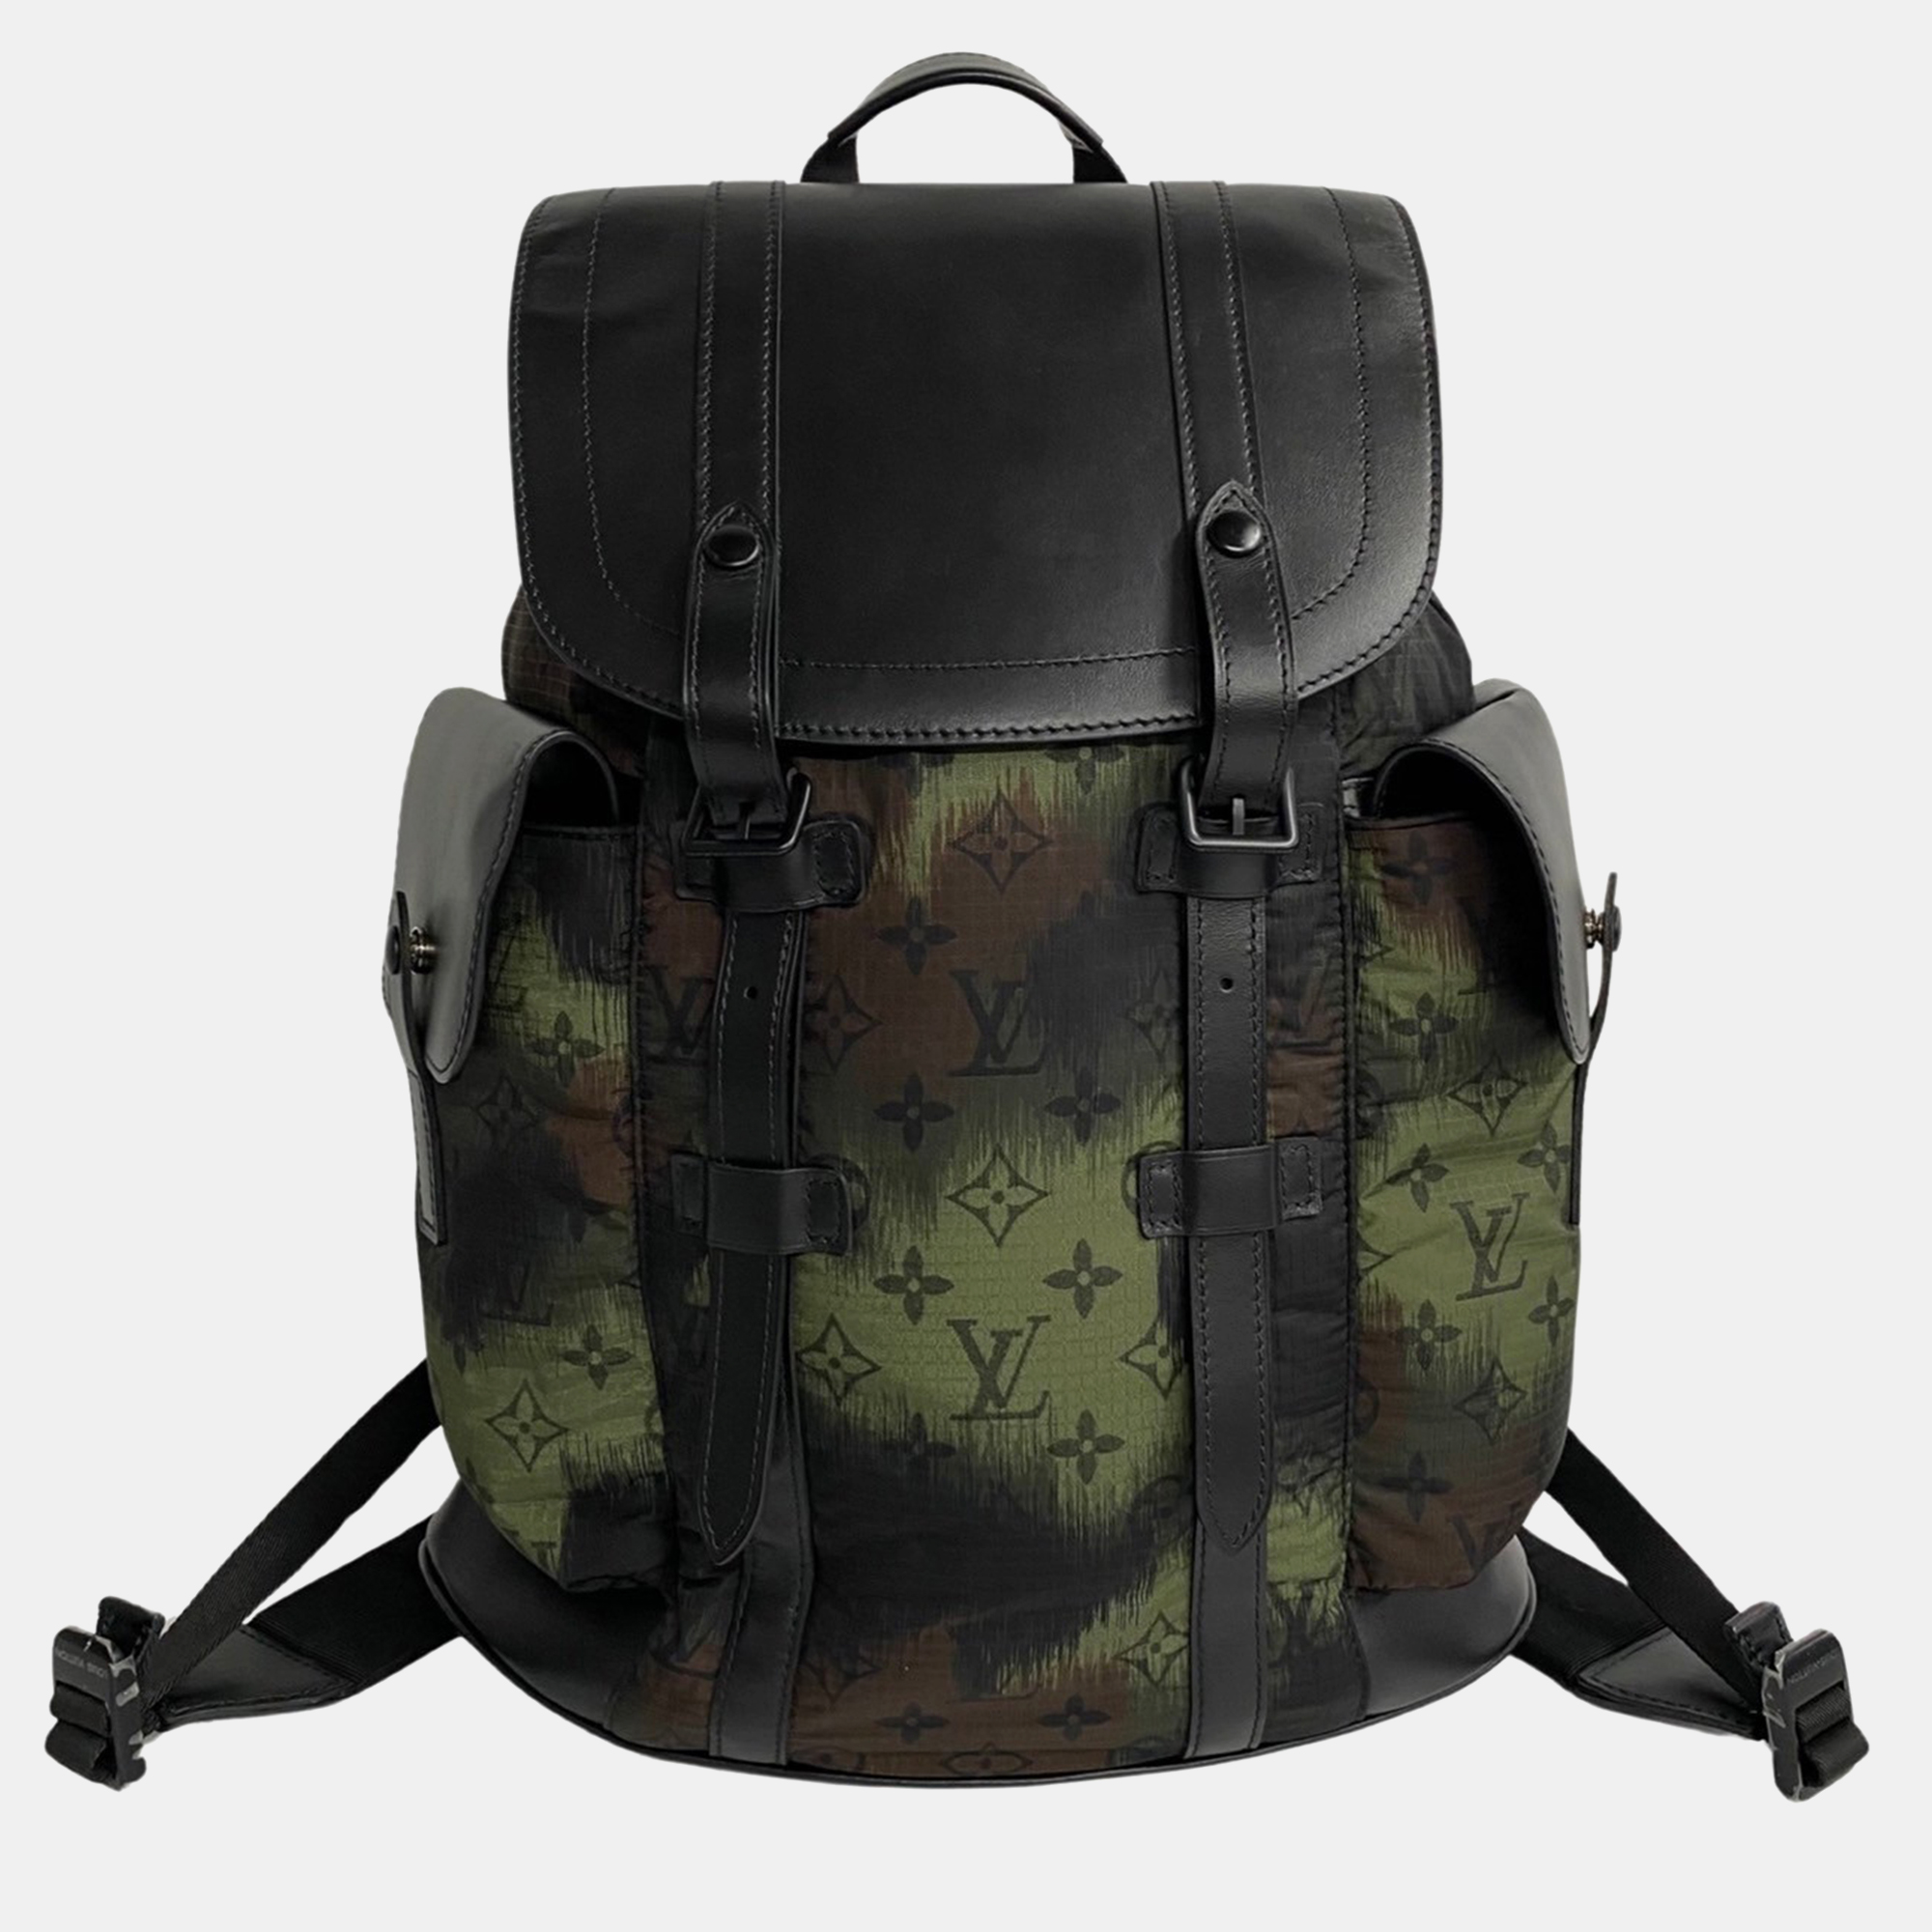 Louis vuitton black leather christopher pm backpack